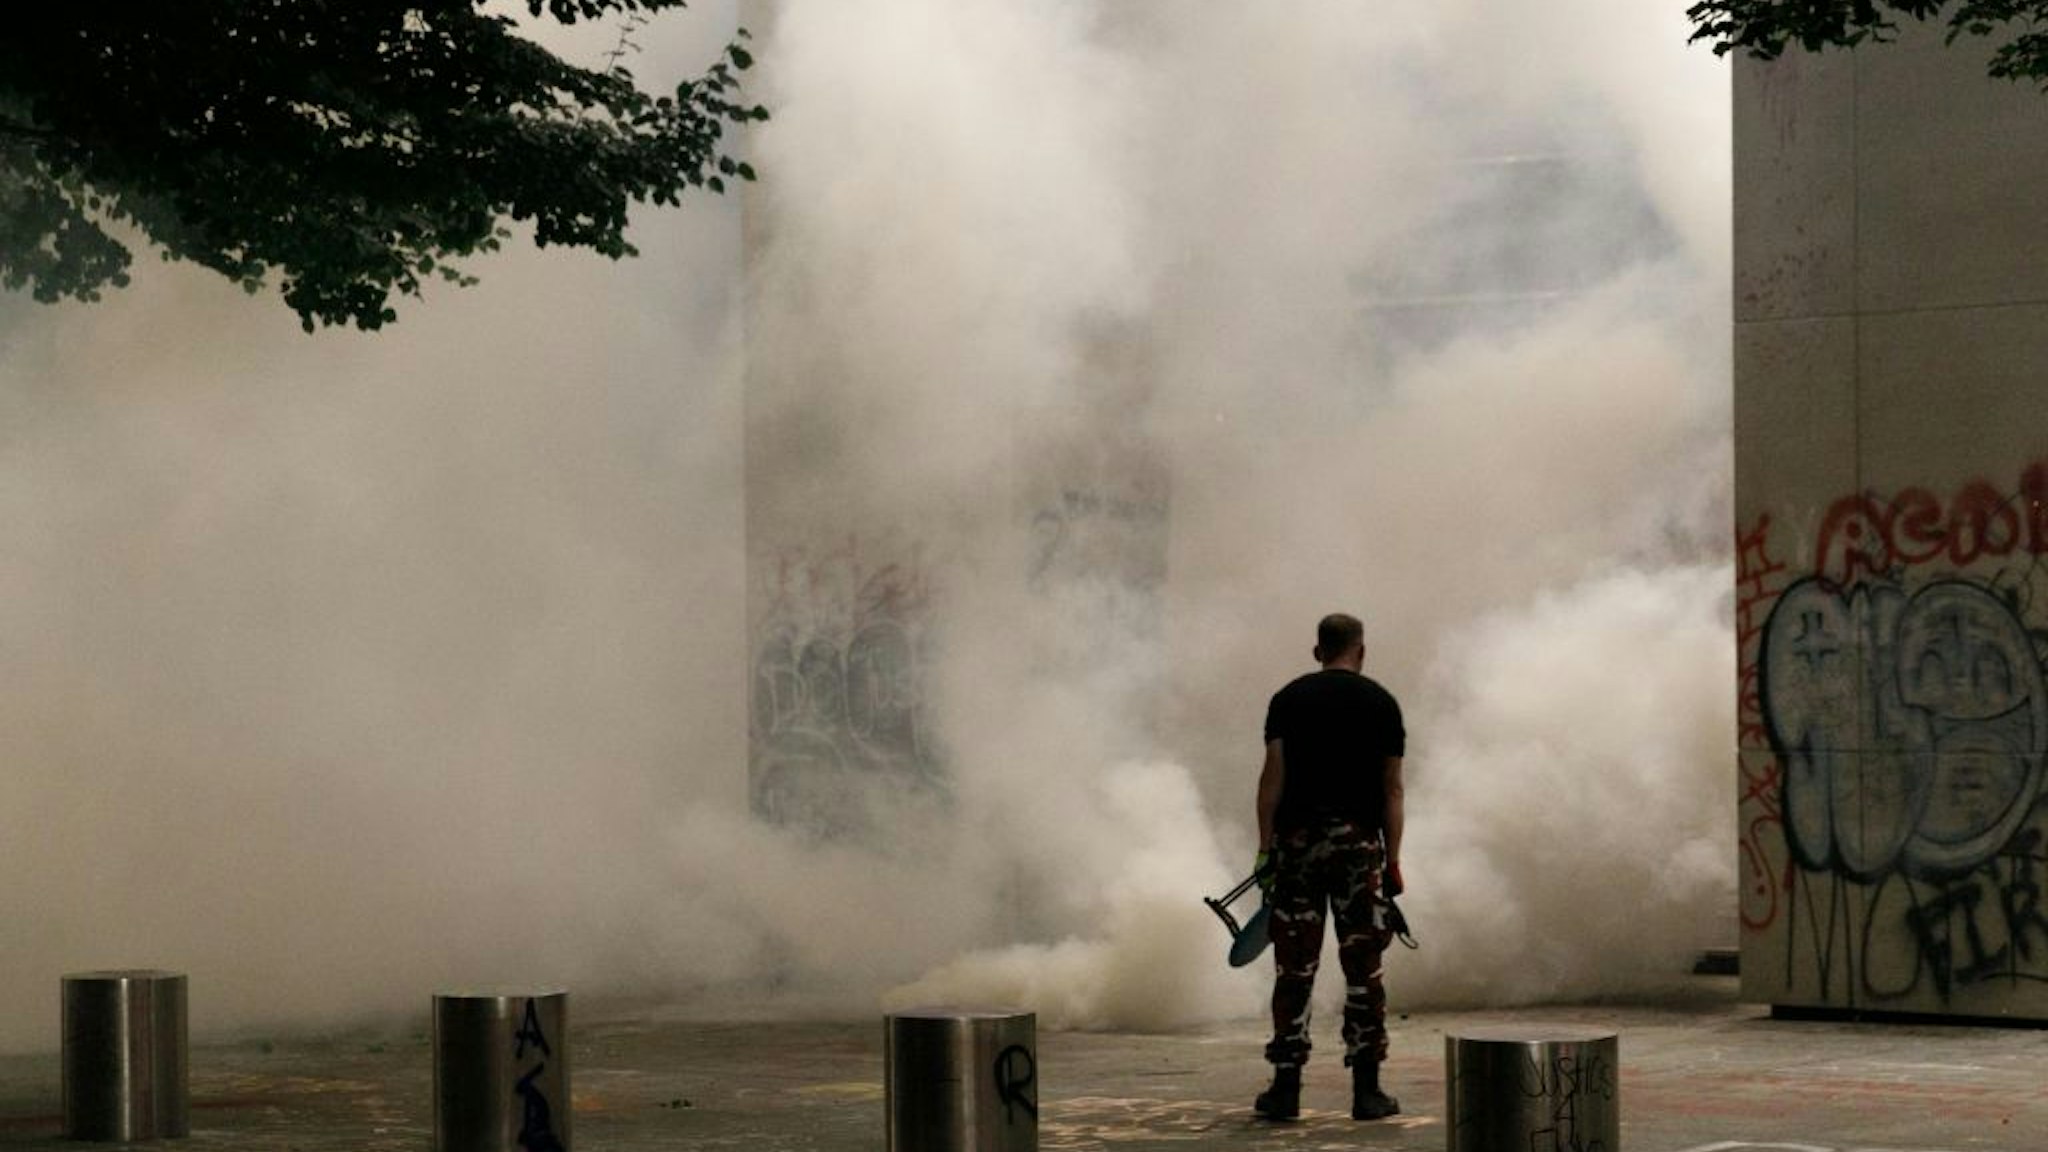 PORTLAND, OREGON, USA: Tear gas and fireworks mix as Black Lives Matter supporters demonstrate in Portland, Oregon on July 4, 2020 for the thirty-eighth day in a row at Portland's Justice Center and throughout Portland, with a riot declared about 12.20 am on July 5. CS tear gas and less-lethal weapons were used, and multiple arrests were made. (Photo by John Rudoff/Anadolu Agency via Getty Images)